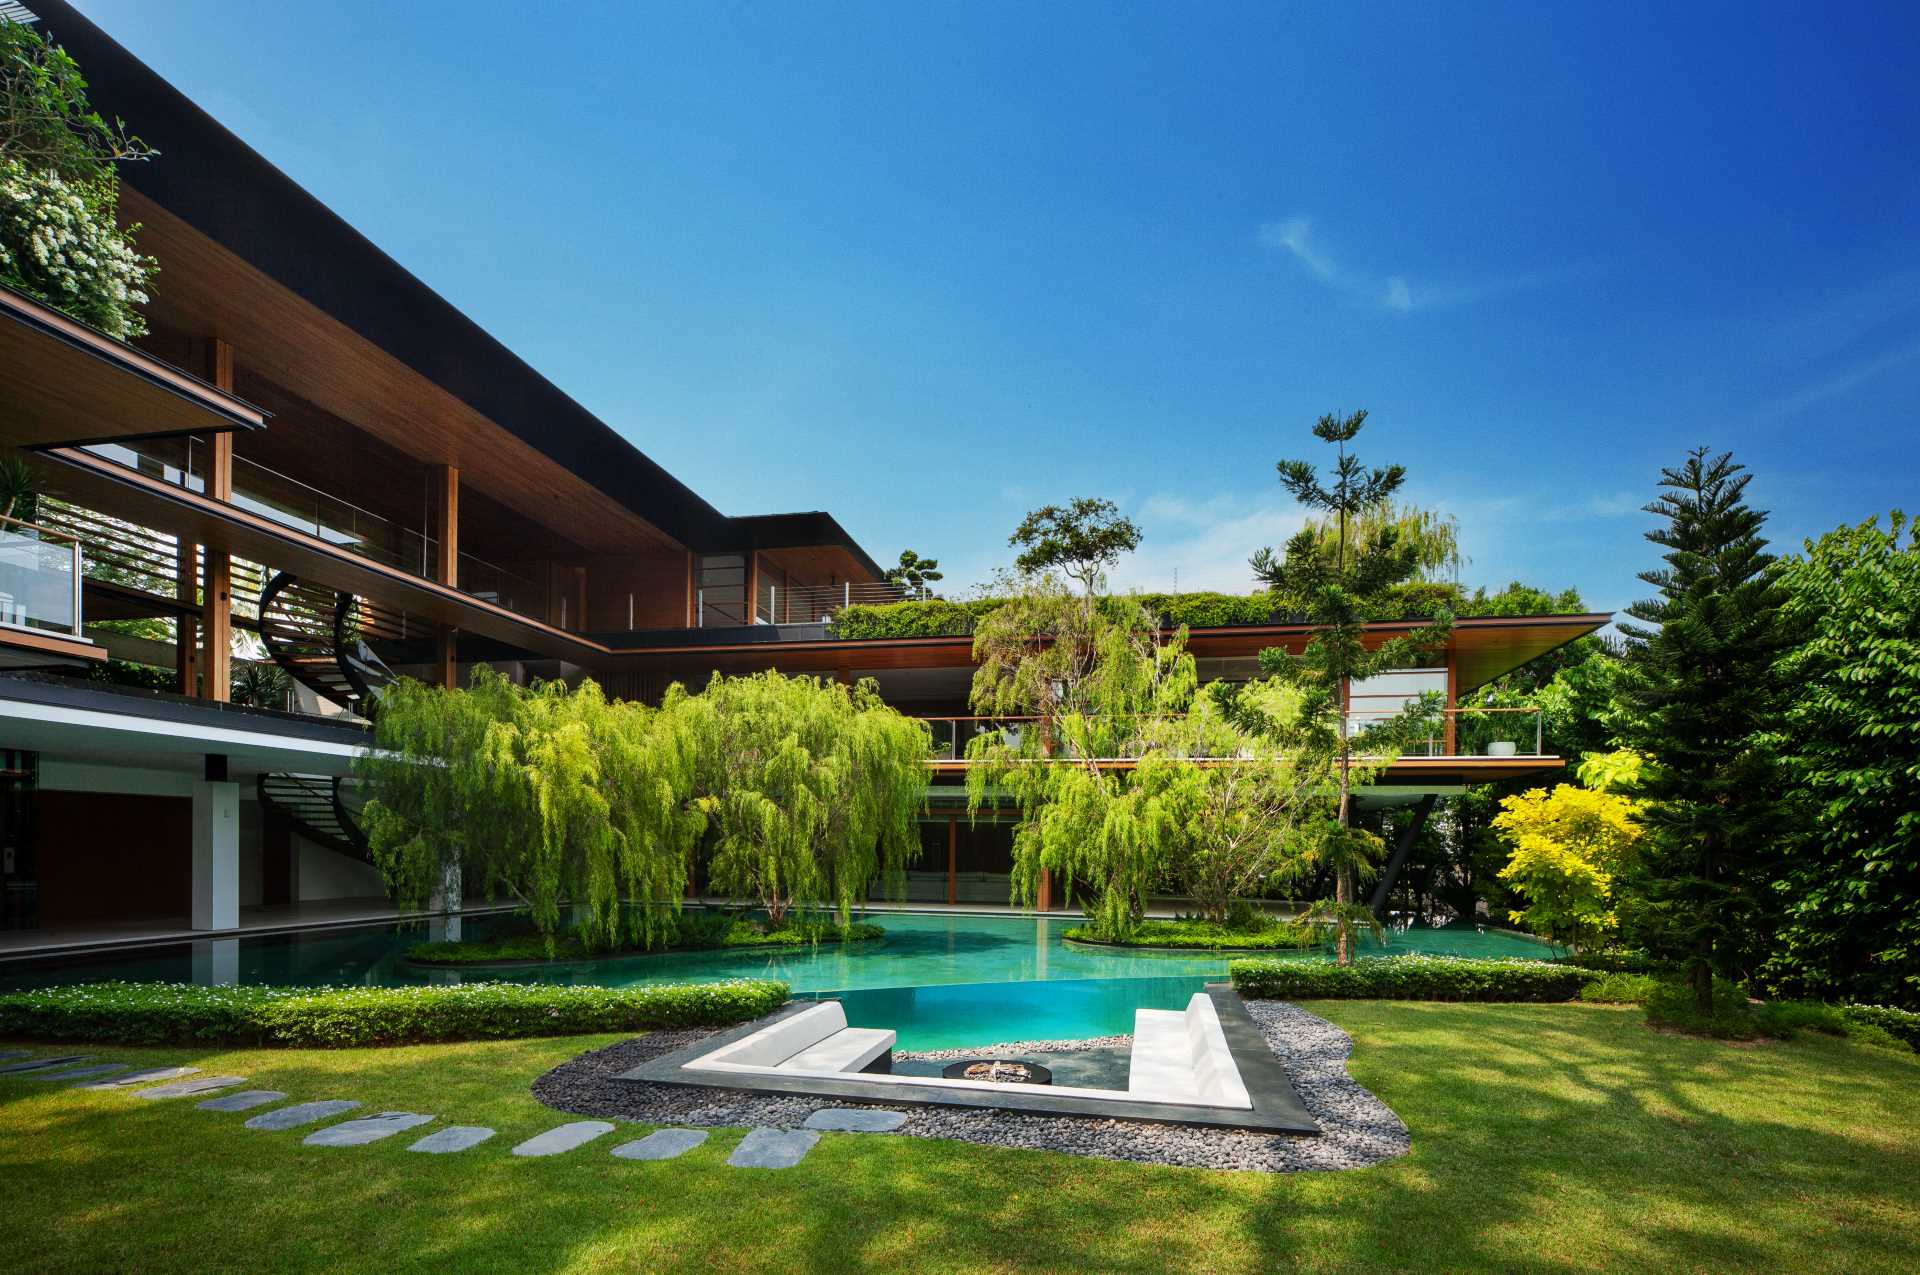 A modern house with plenty of greenery and water features that help keep the home cool.